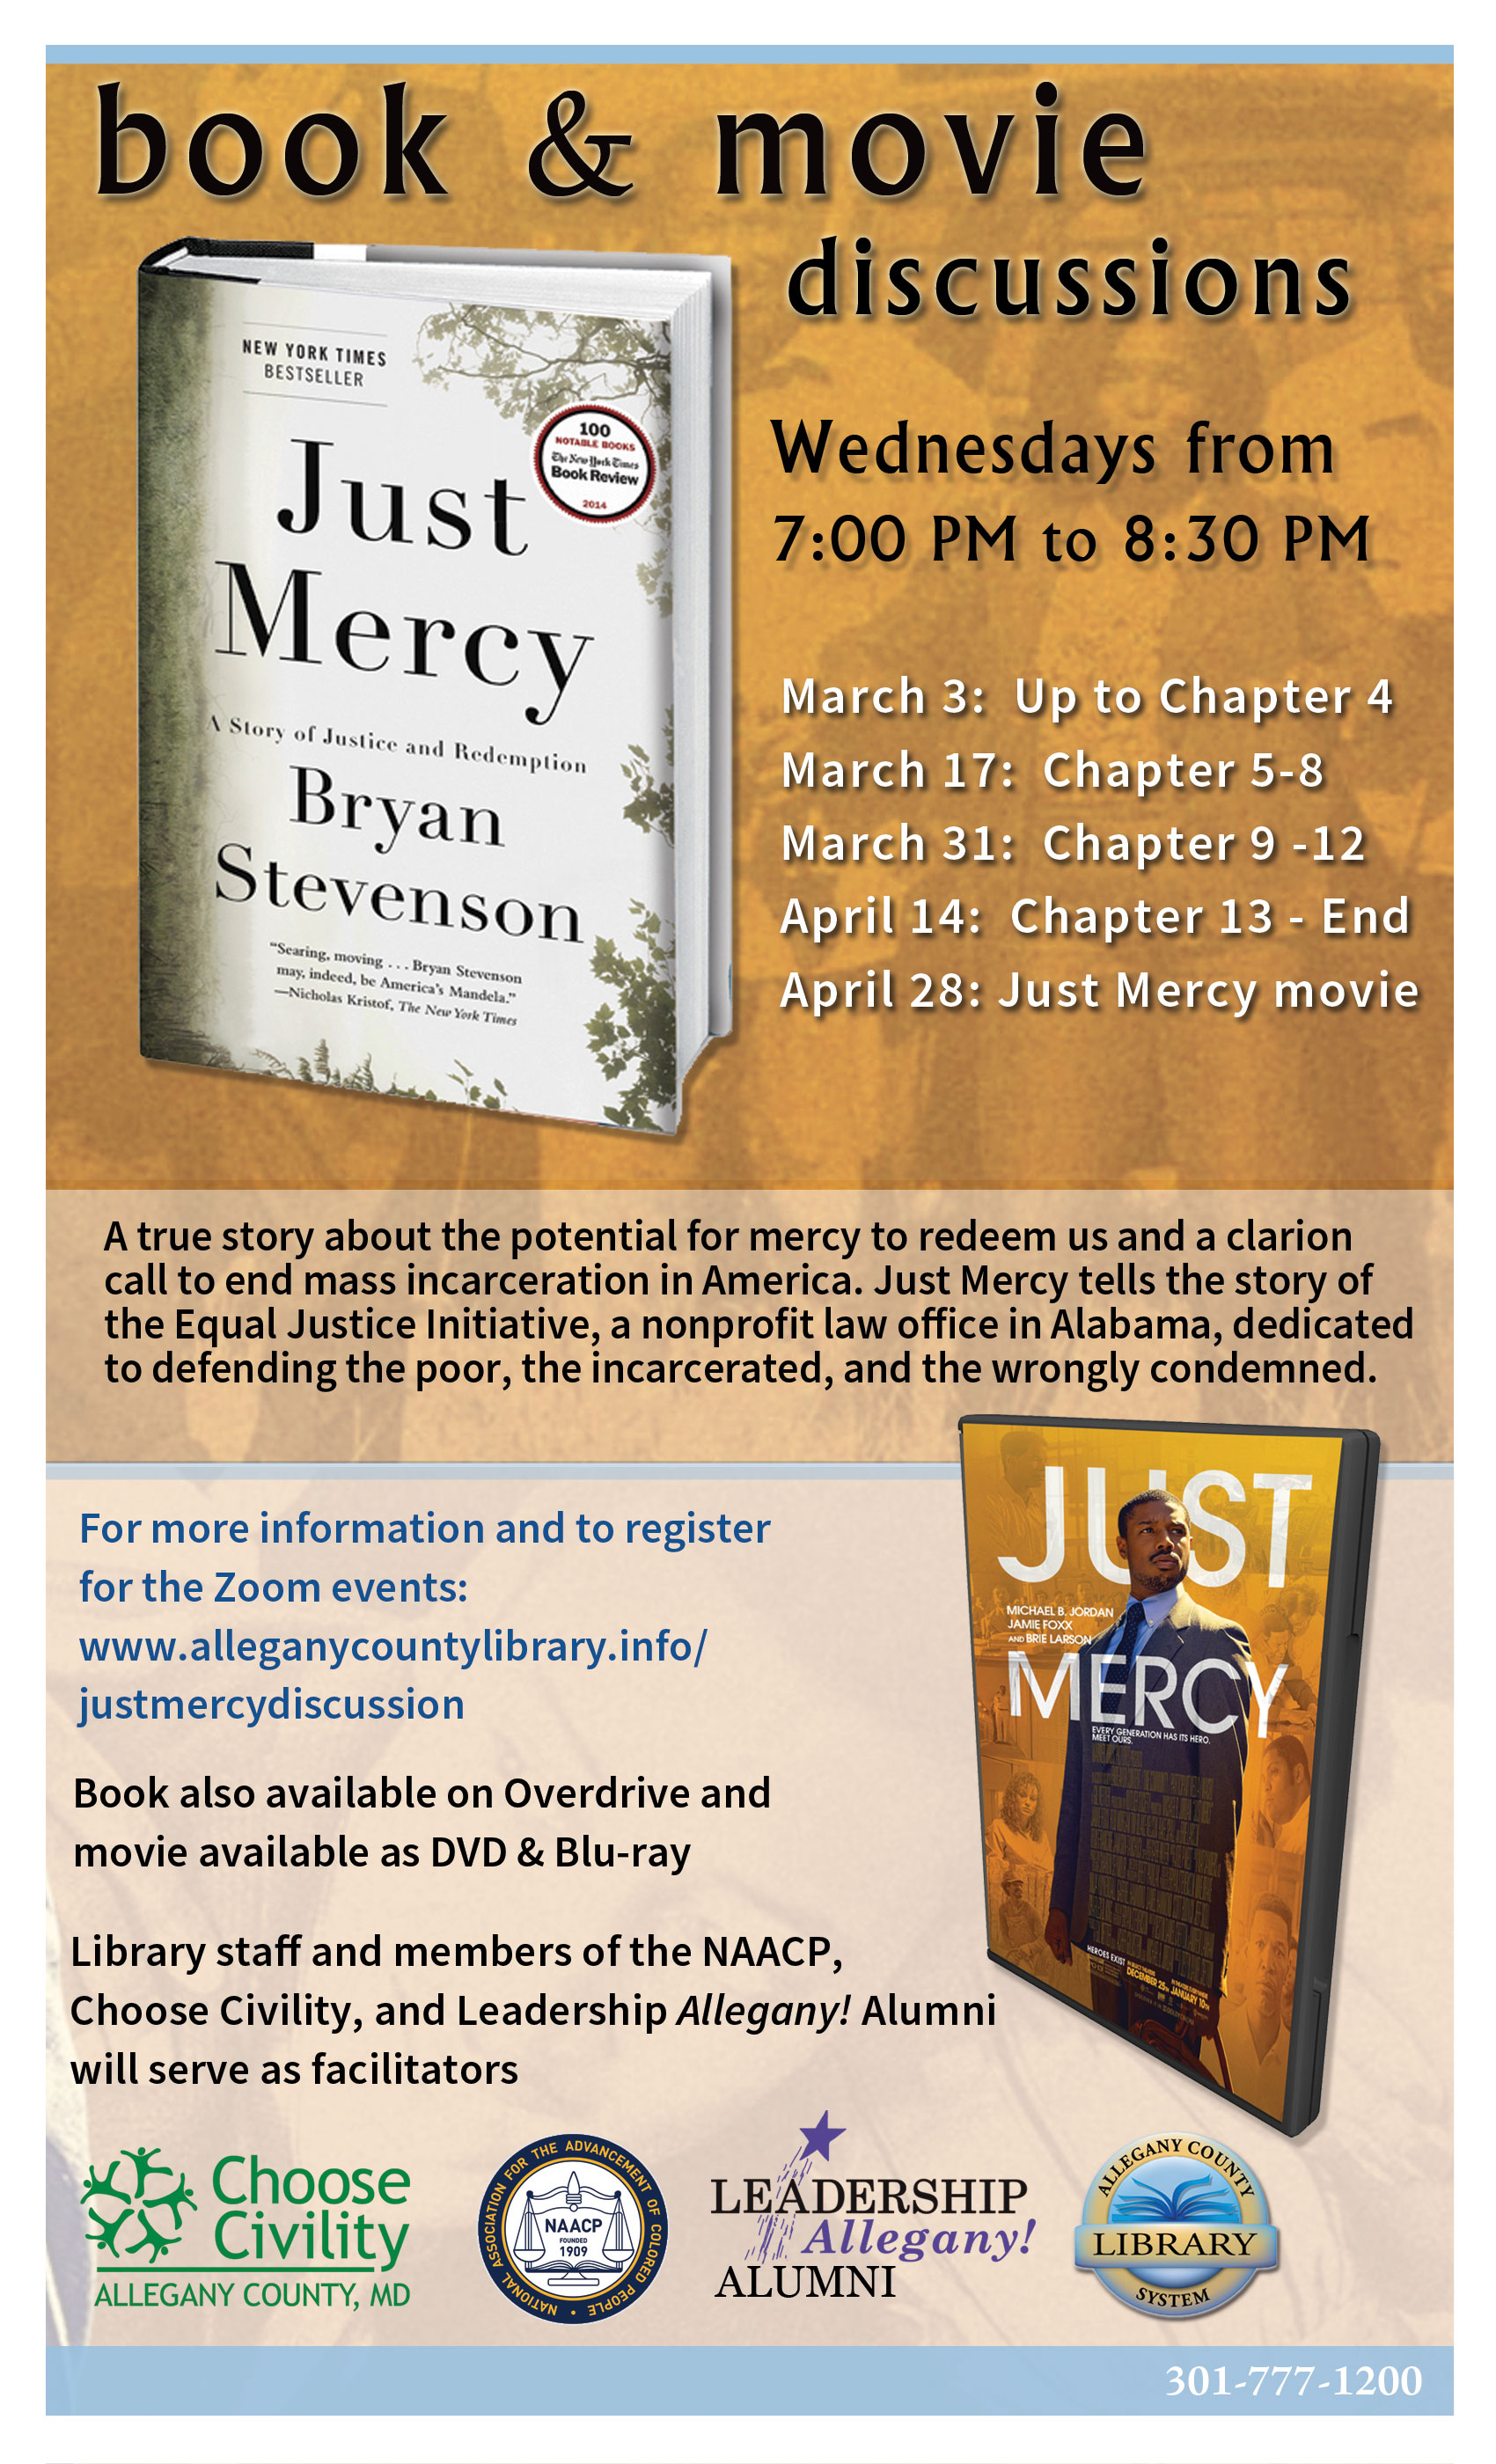 Just Mercy book discussion poster